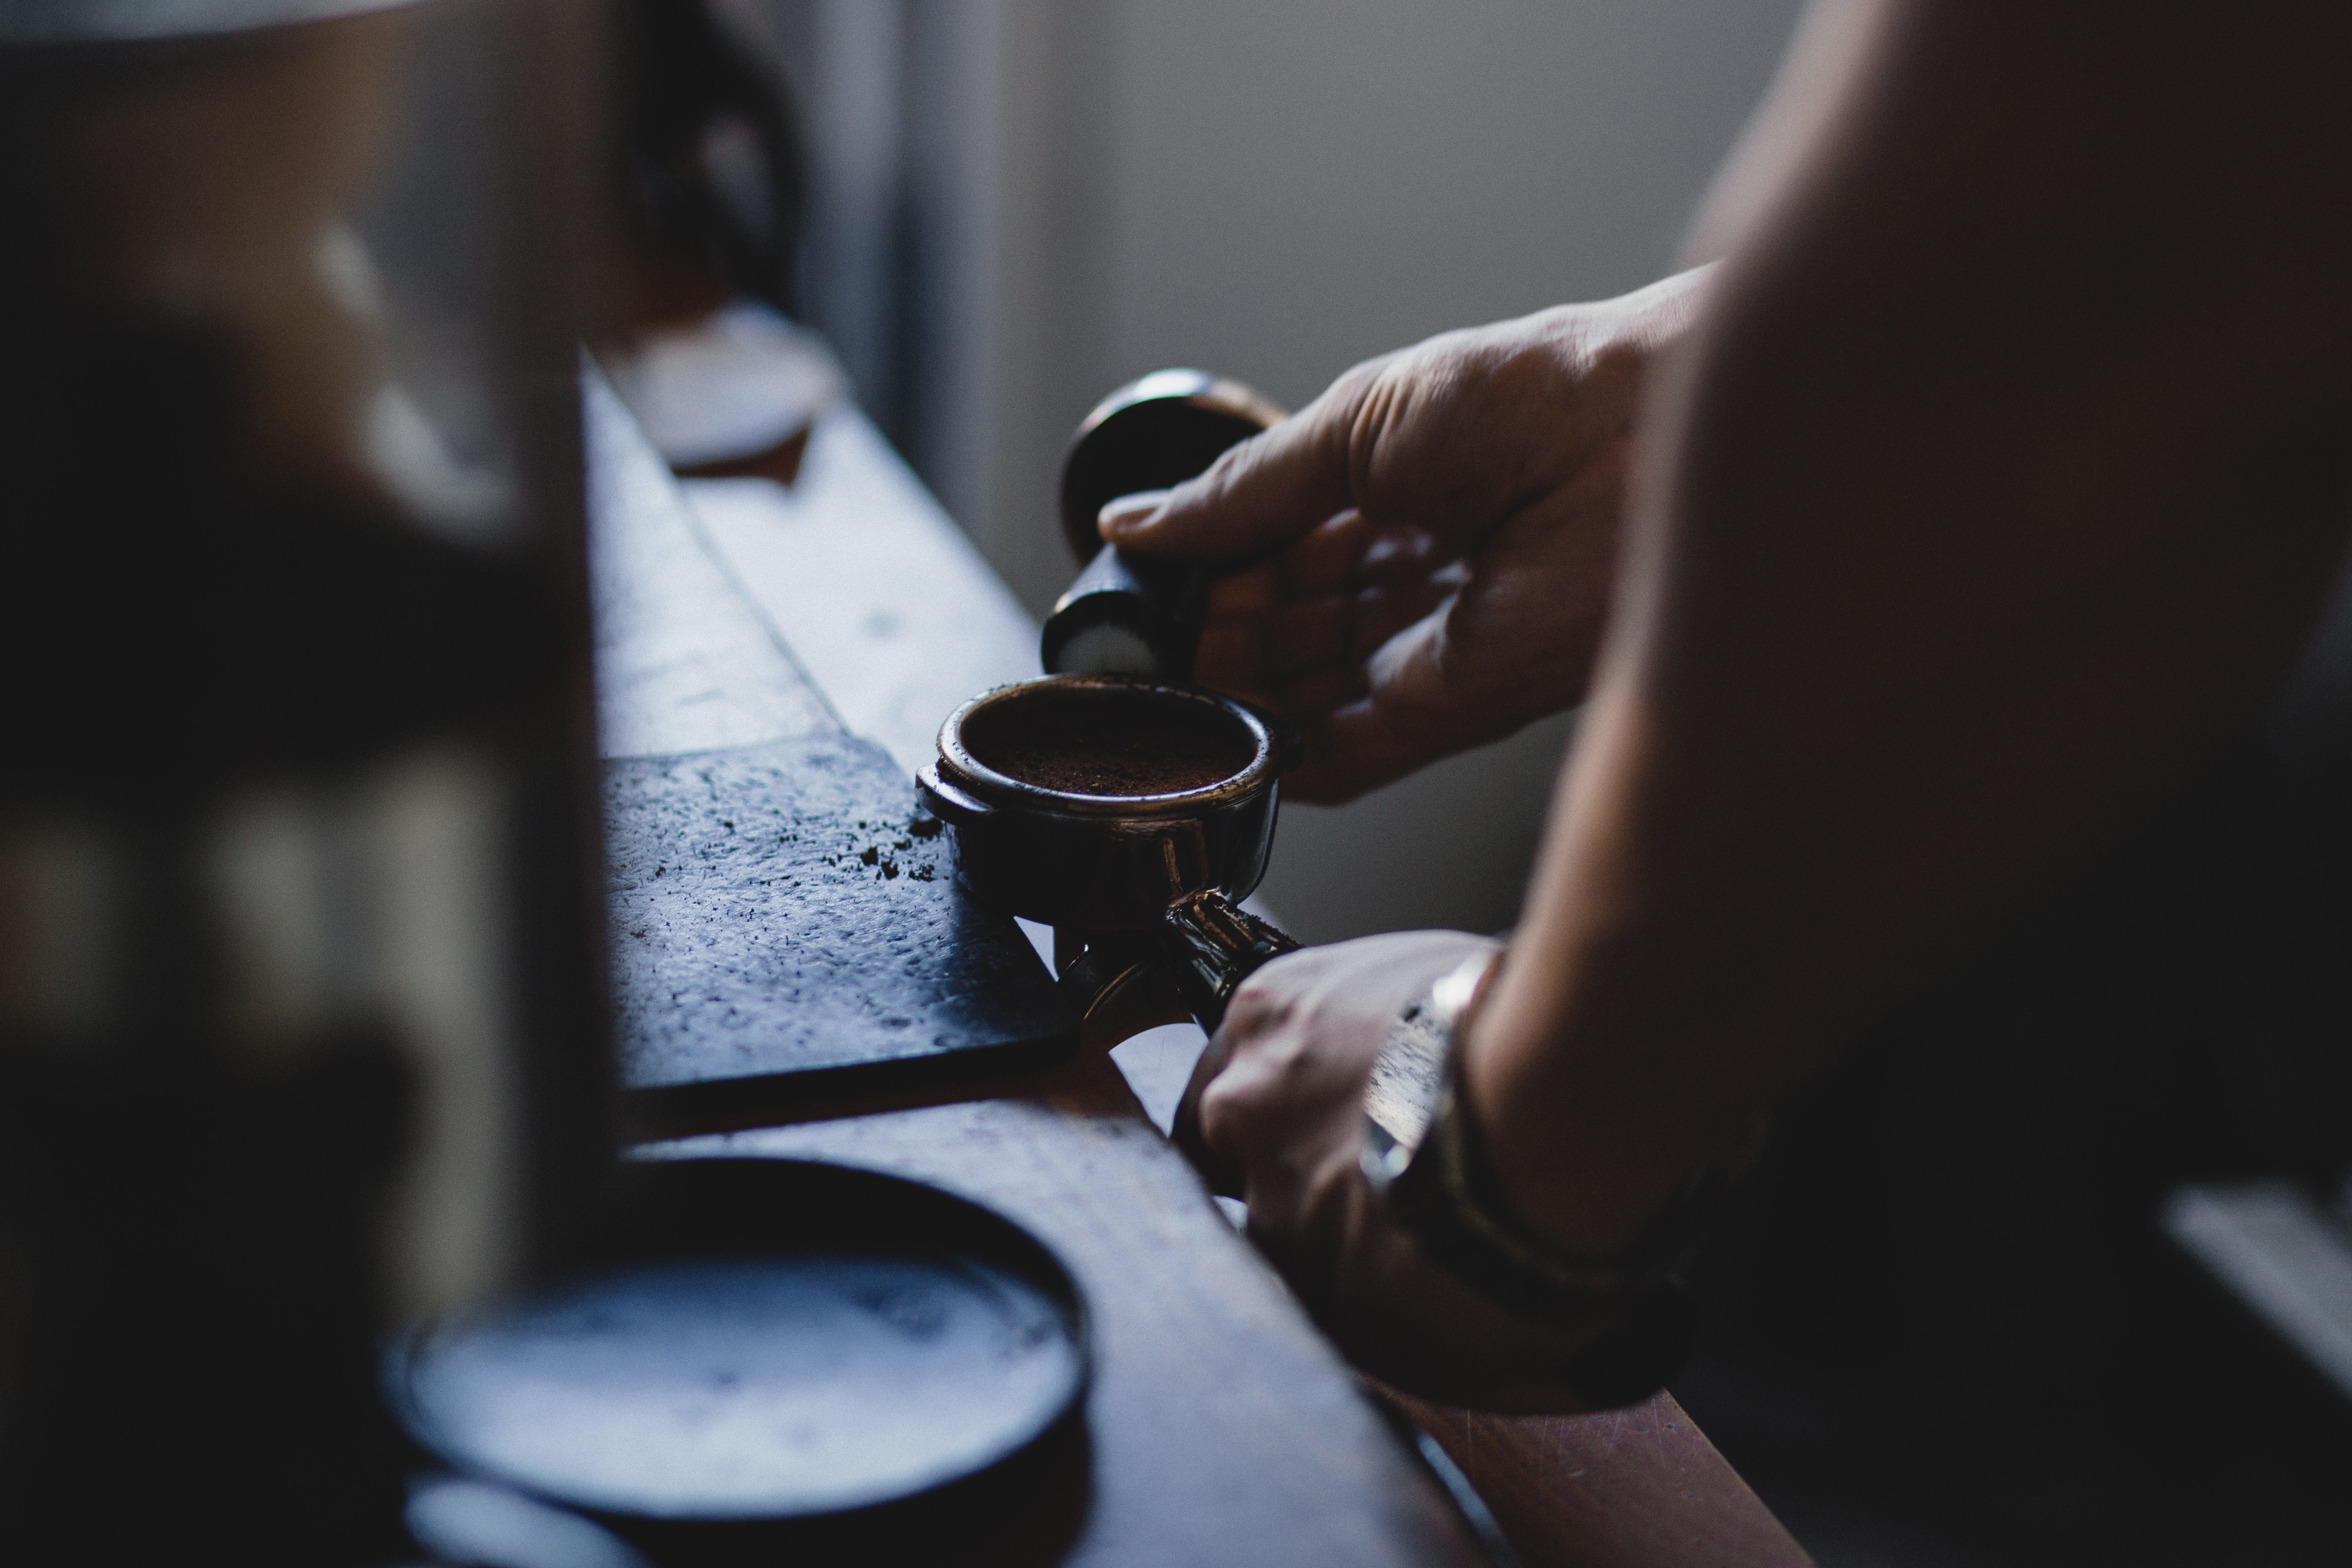 Person Holding Black Ornament While Shaping Metal Component, Beverage, Blur, Business, Close-up, HQ Photo